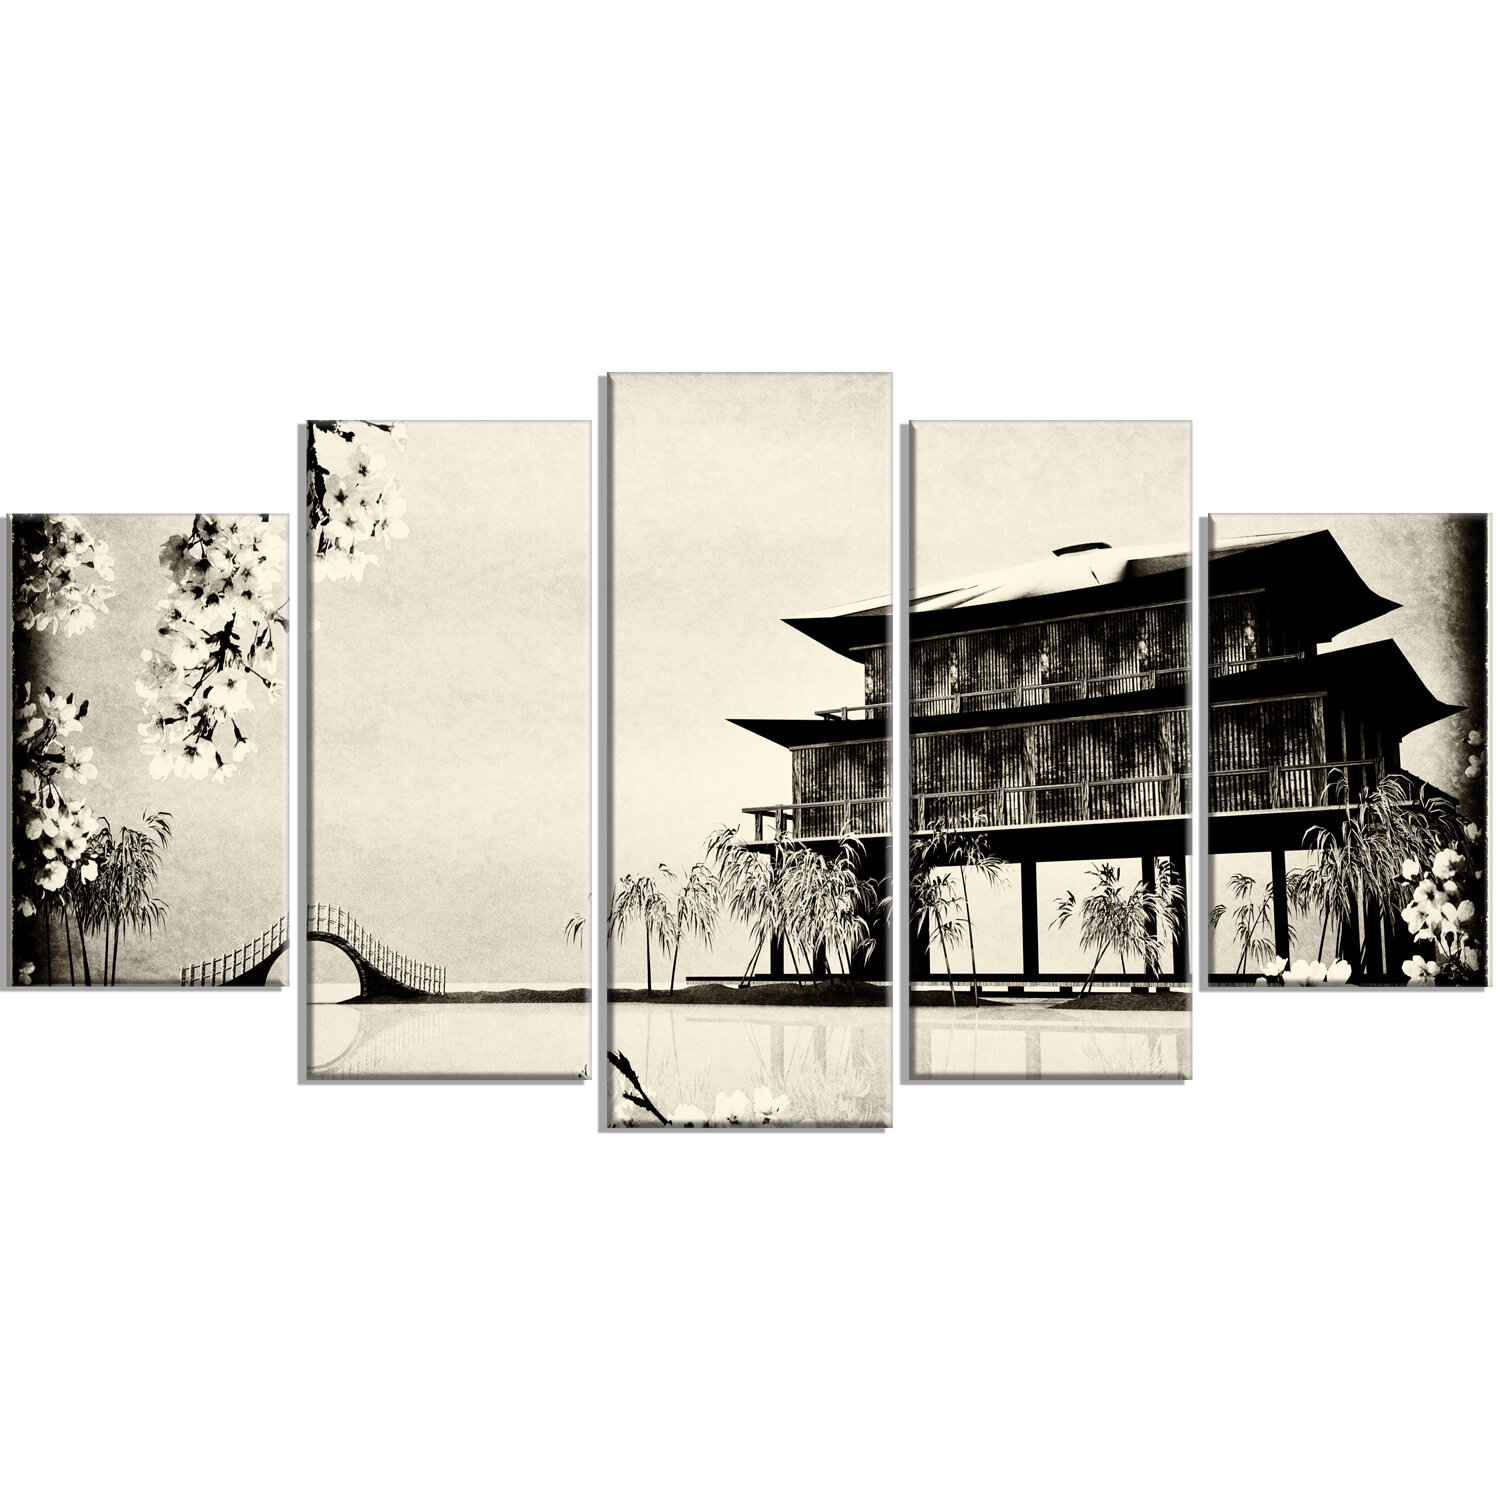 Designart Chinese Ink Painting 5 Piece Wall Art On Wrapped Canvas Set Wayfair